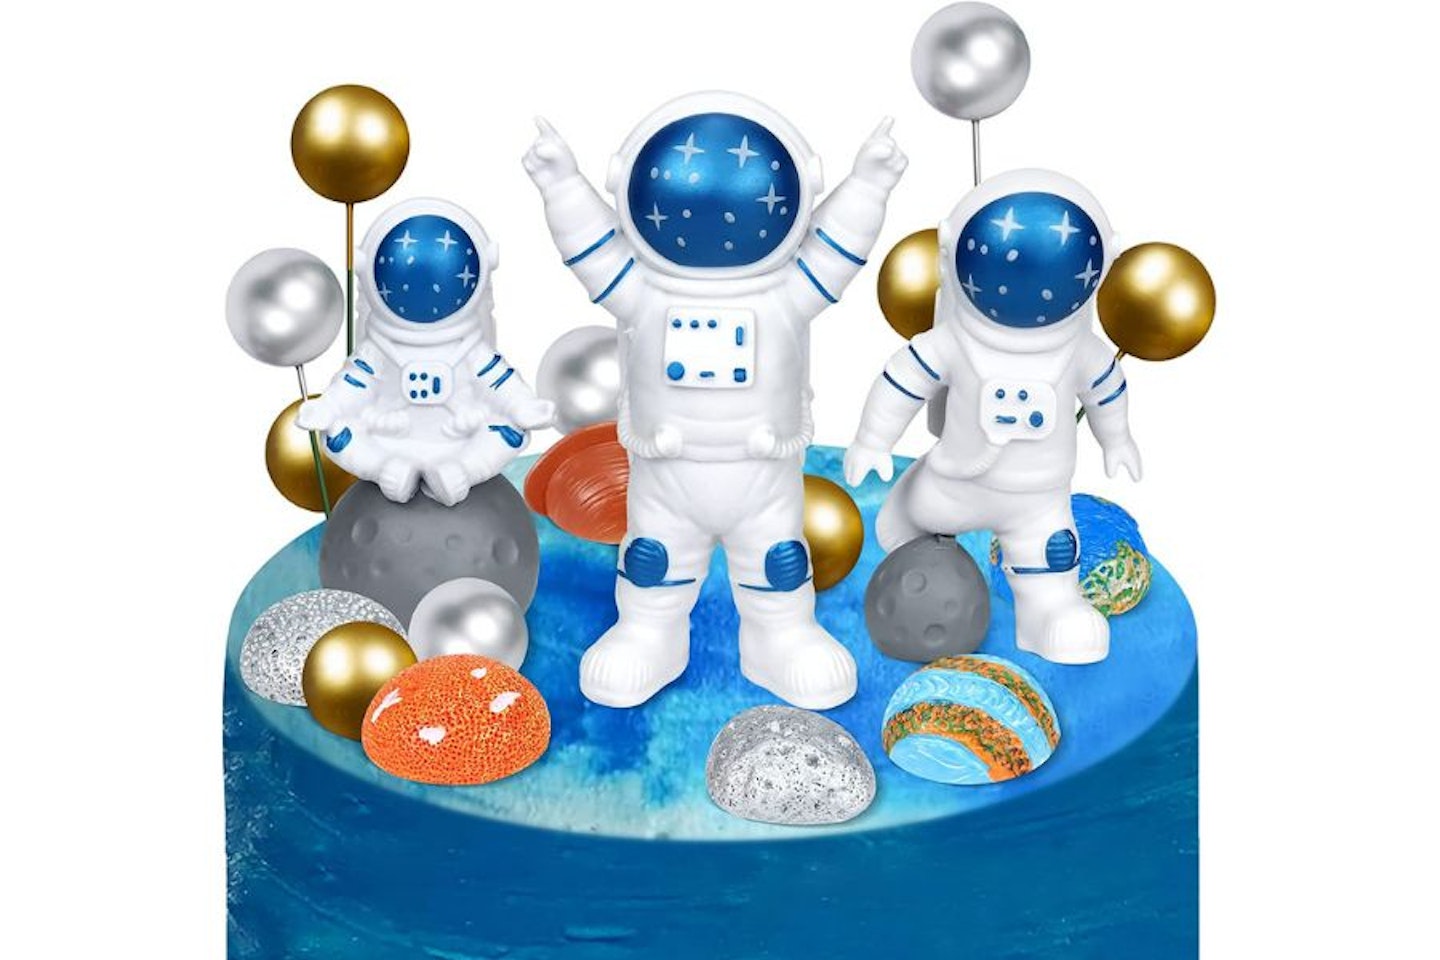 Space party ideas - Lanfly 19 Pack Outer Space Theme Happy Birthday Cake Decorations